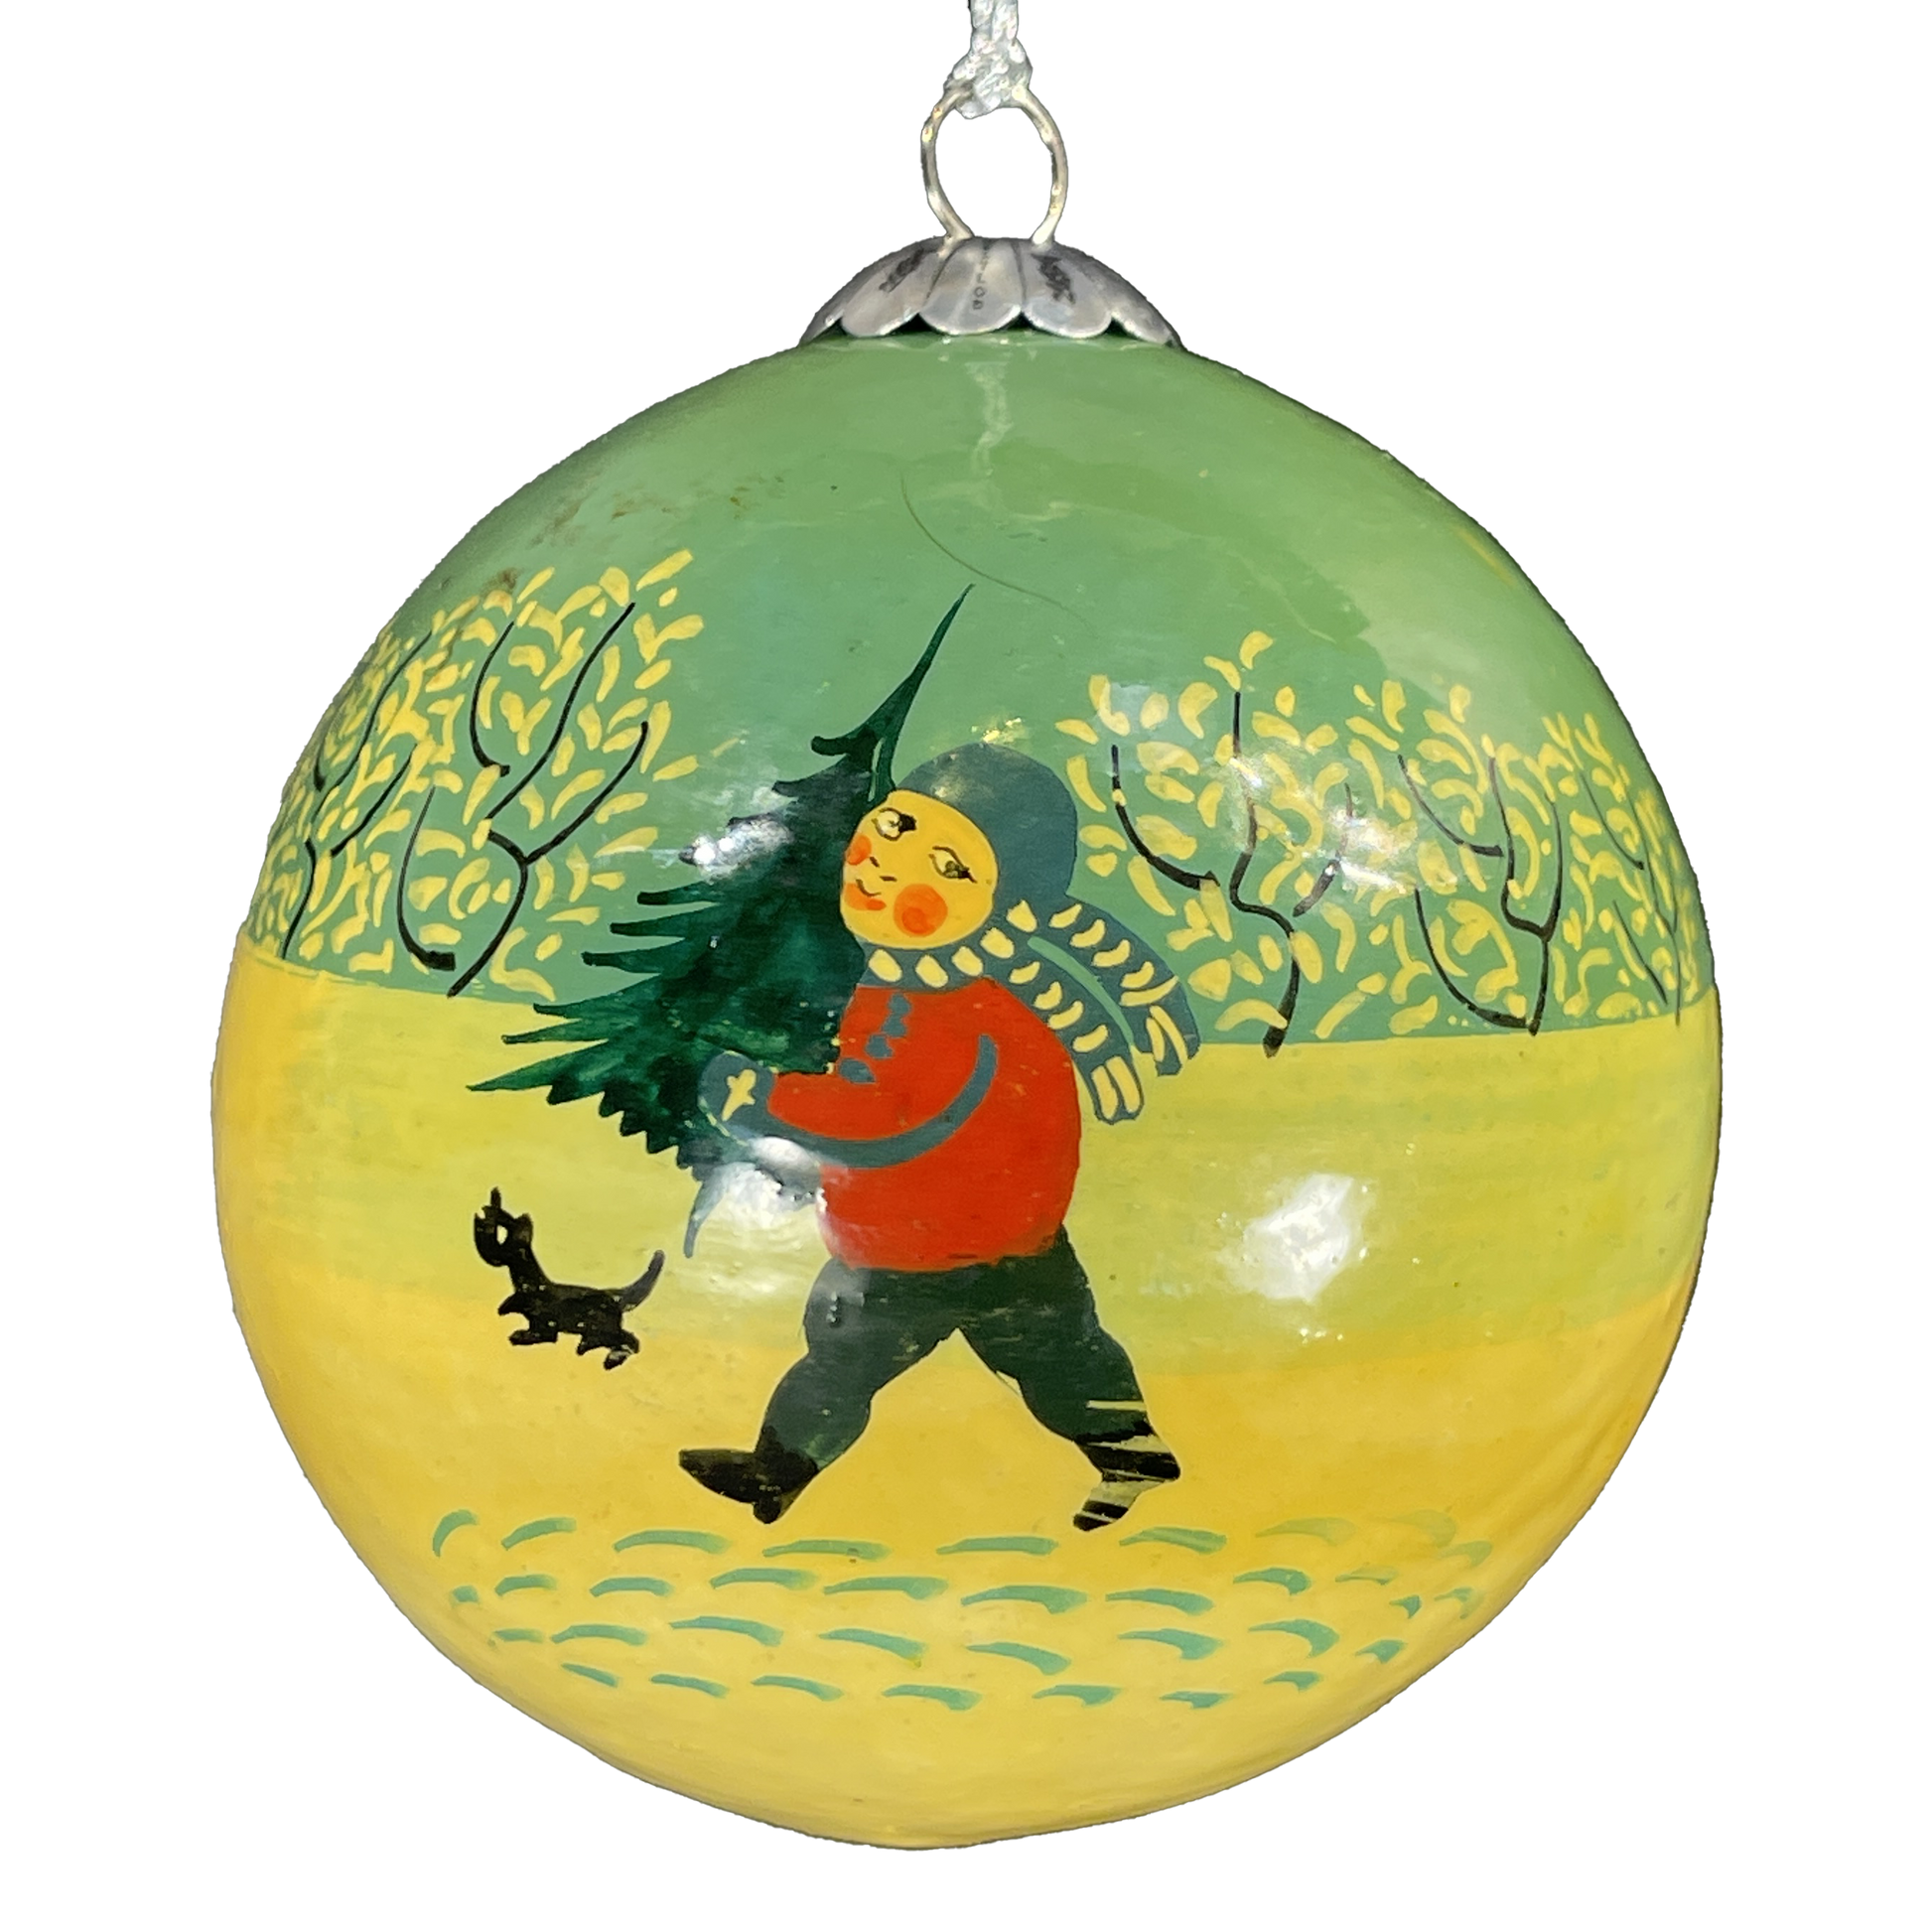 Golden Boy Christmas Bauble for Christmas tree decorations